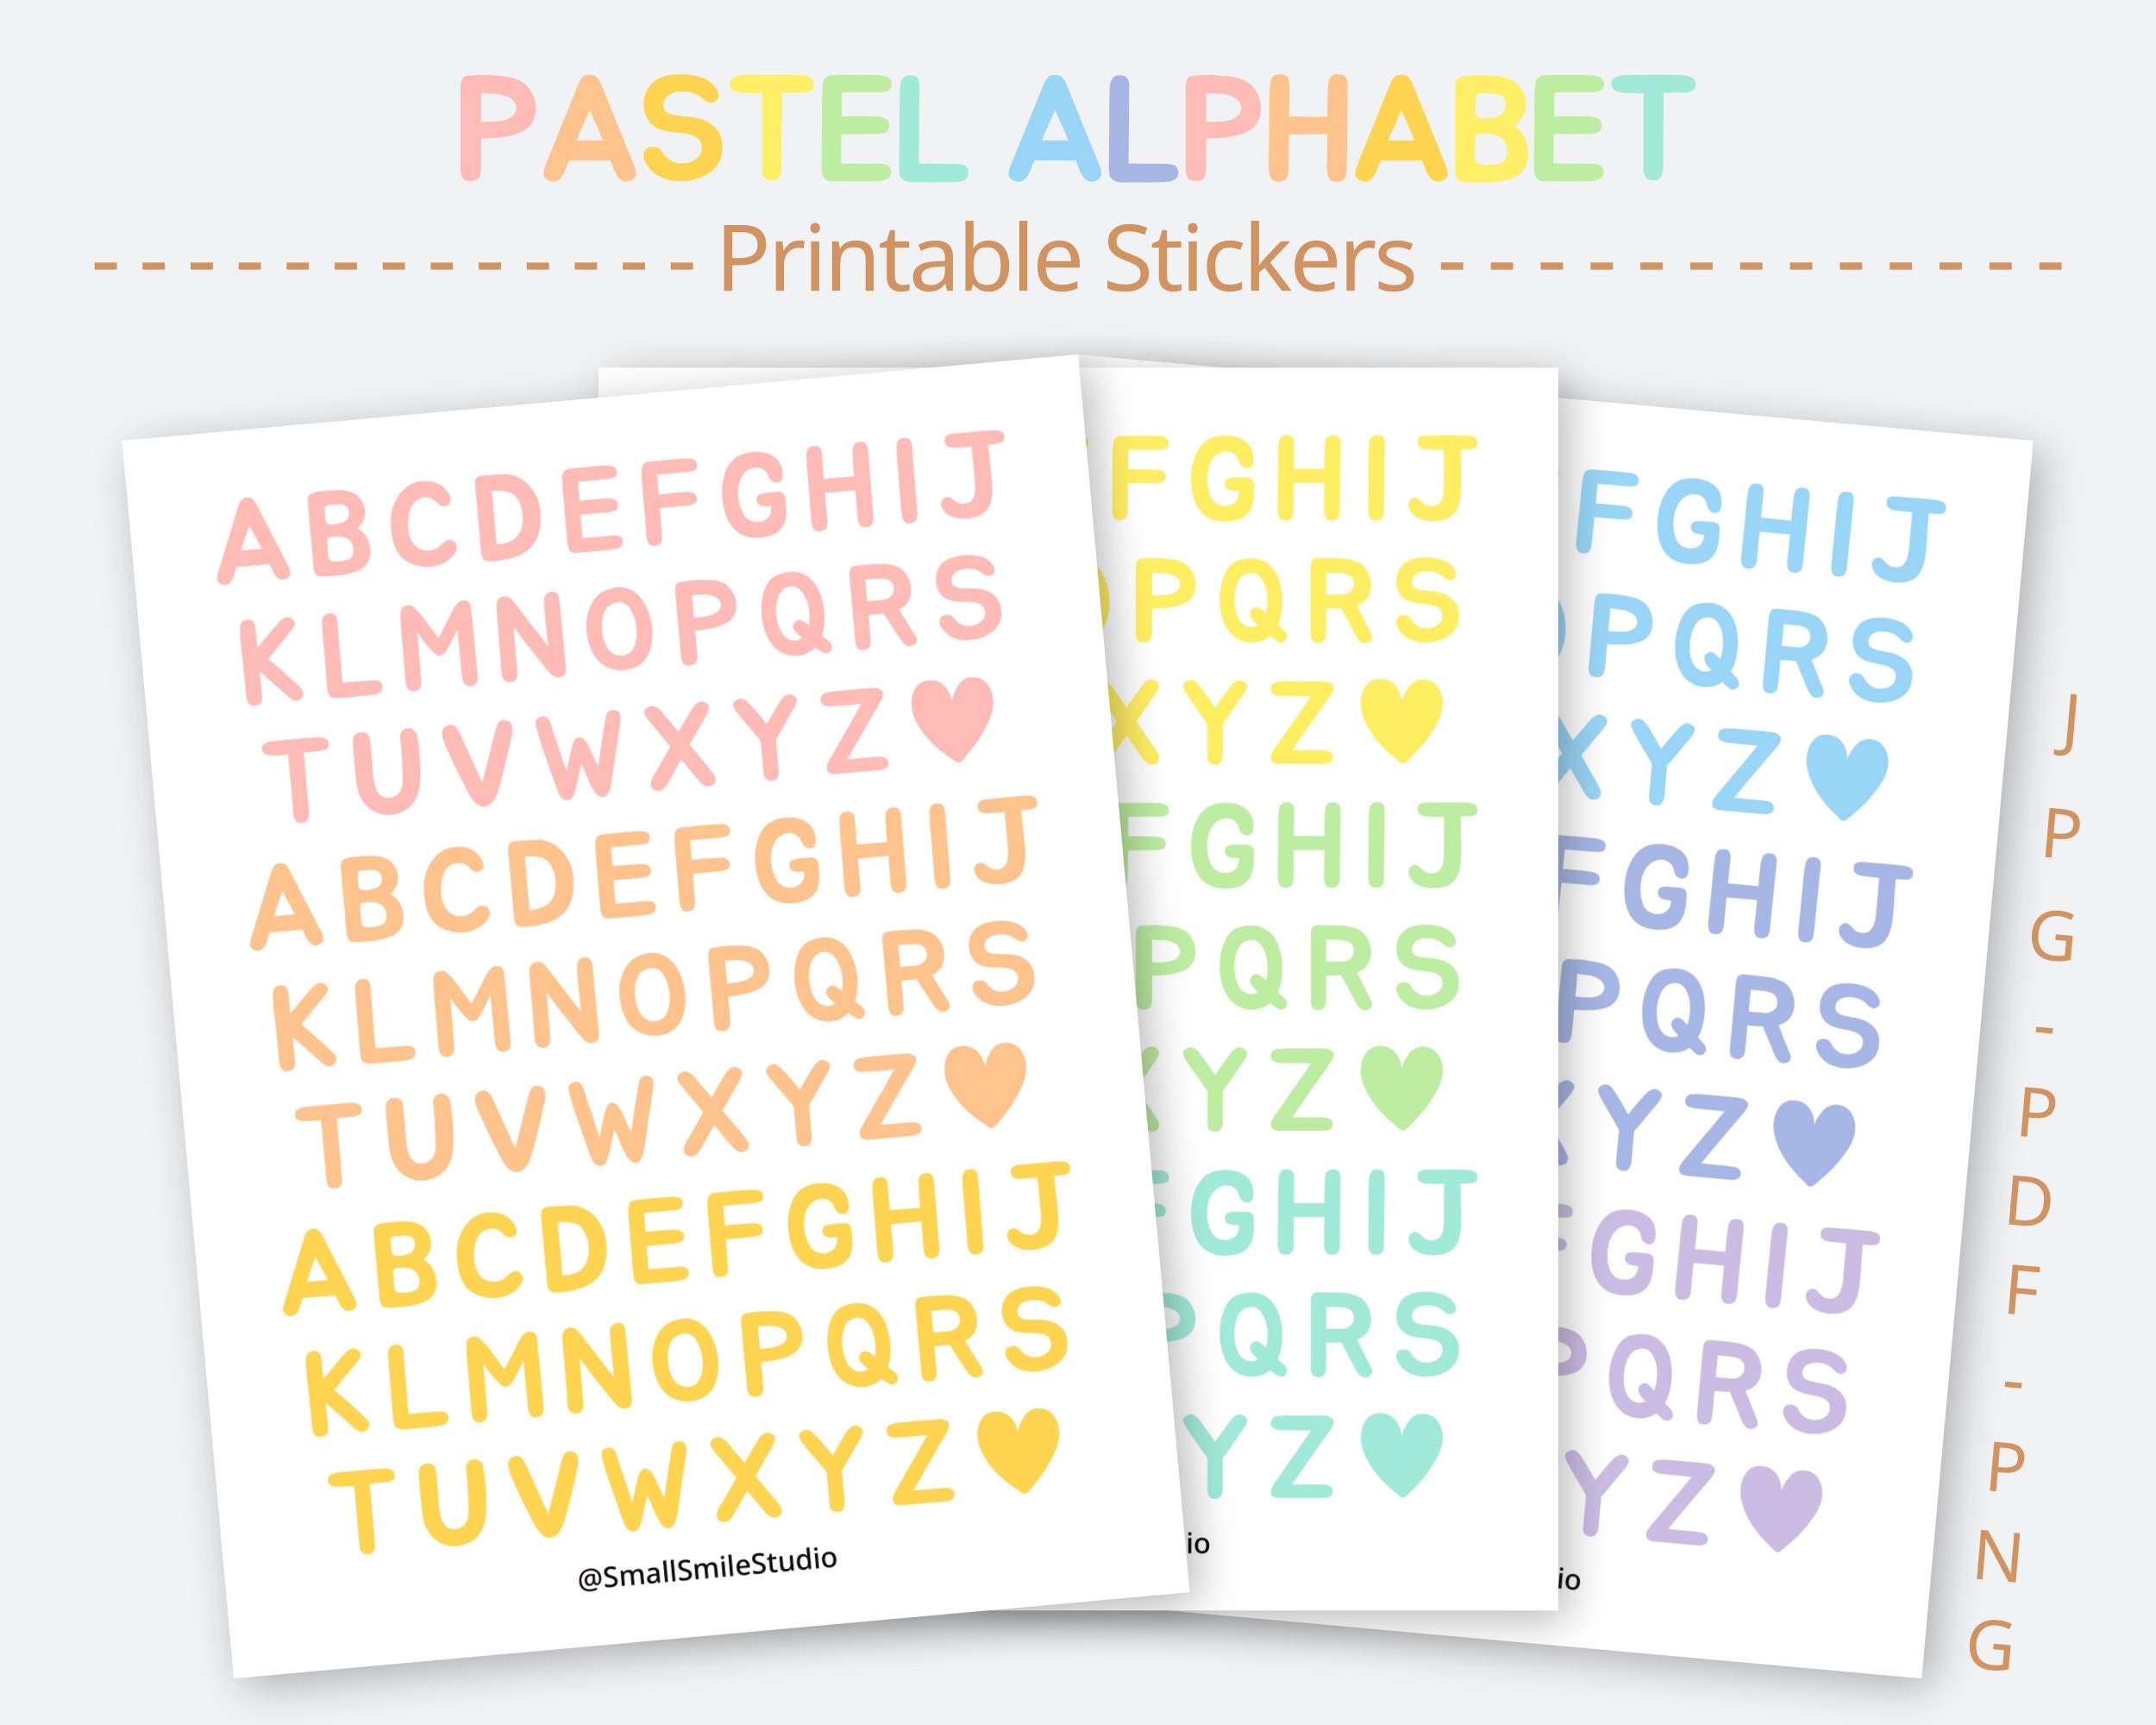 Cut & Paste Font , #AD, #letters#daily#color#variables #Ad  Lettering  alphabet, Scrapbook stickers printable, Lettering